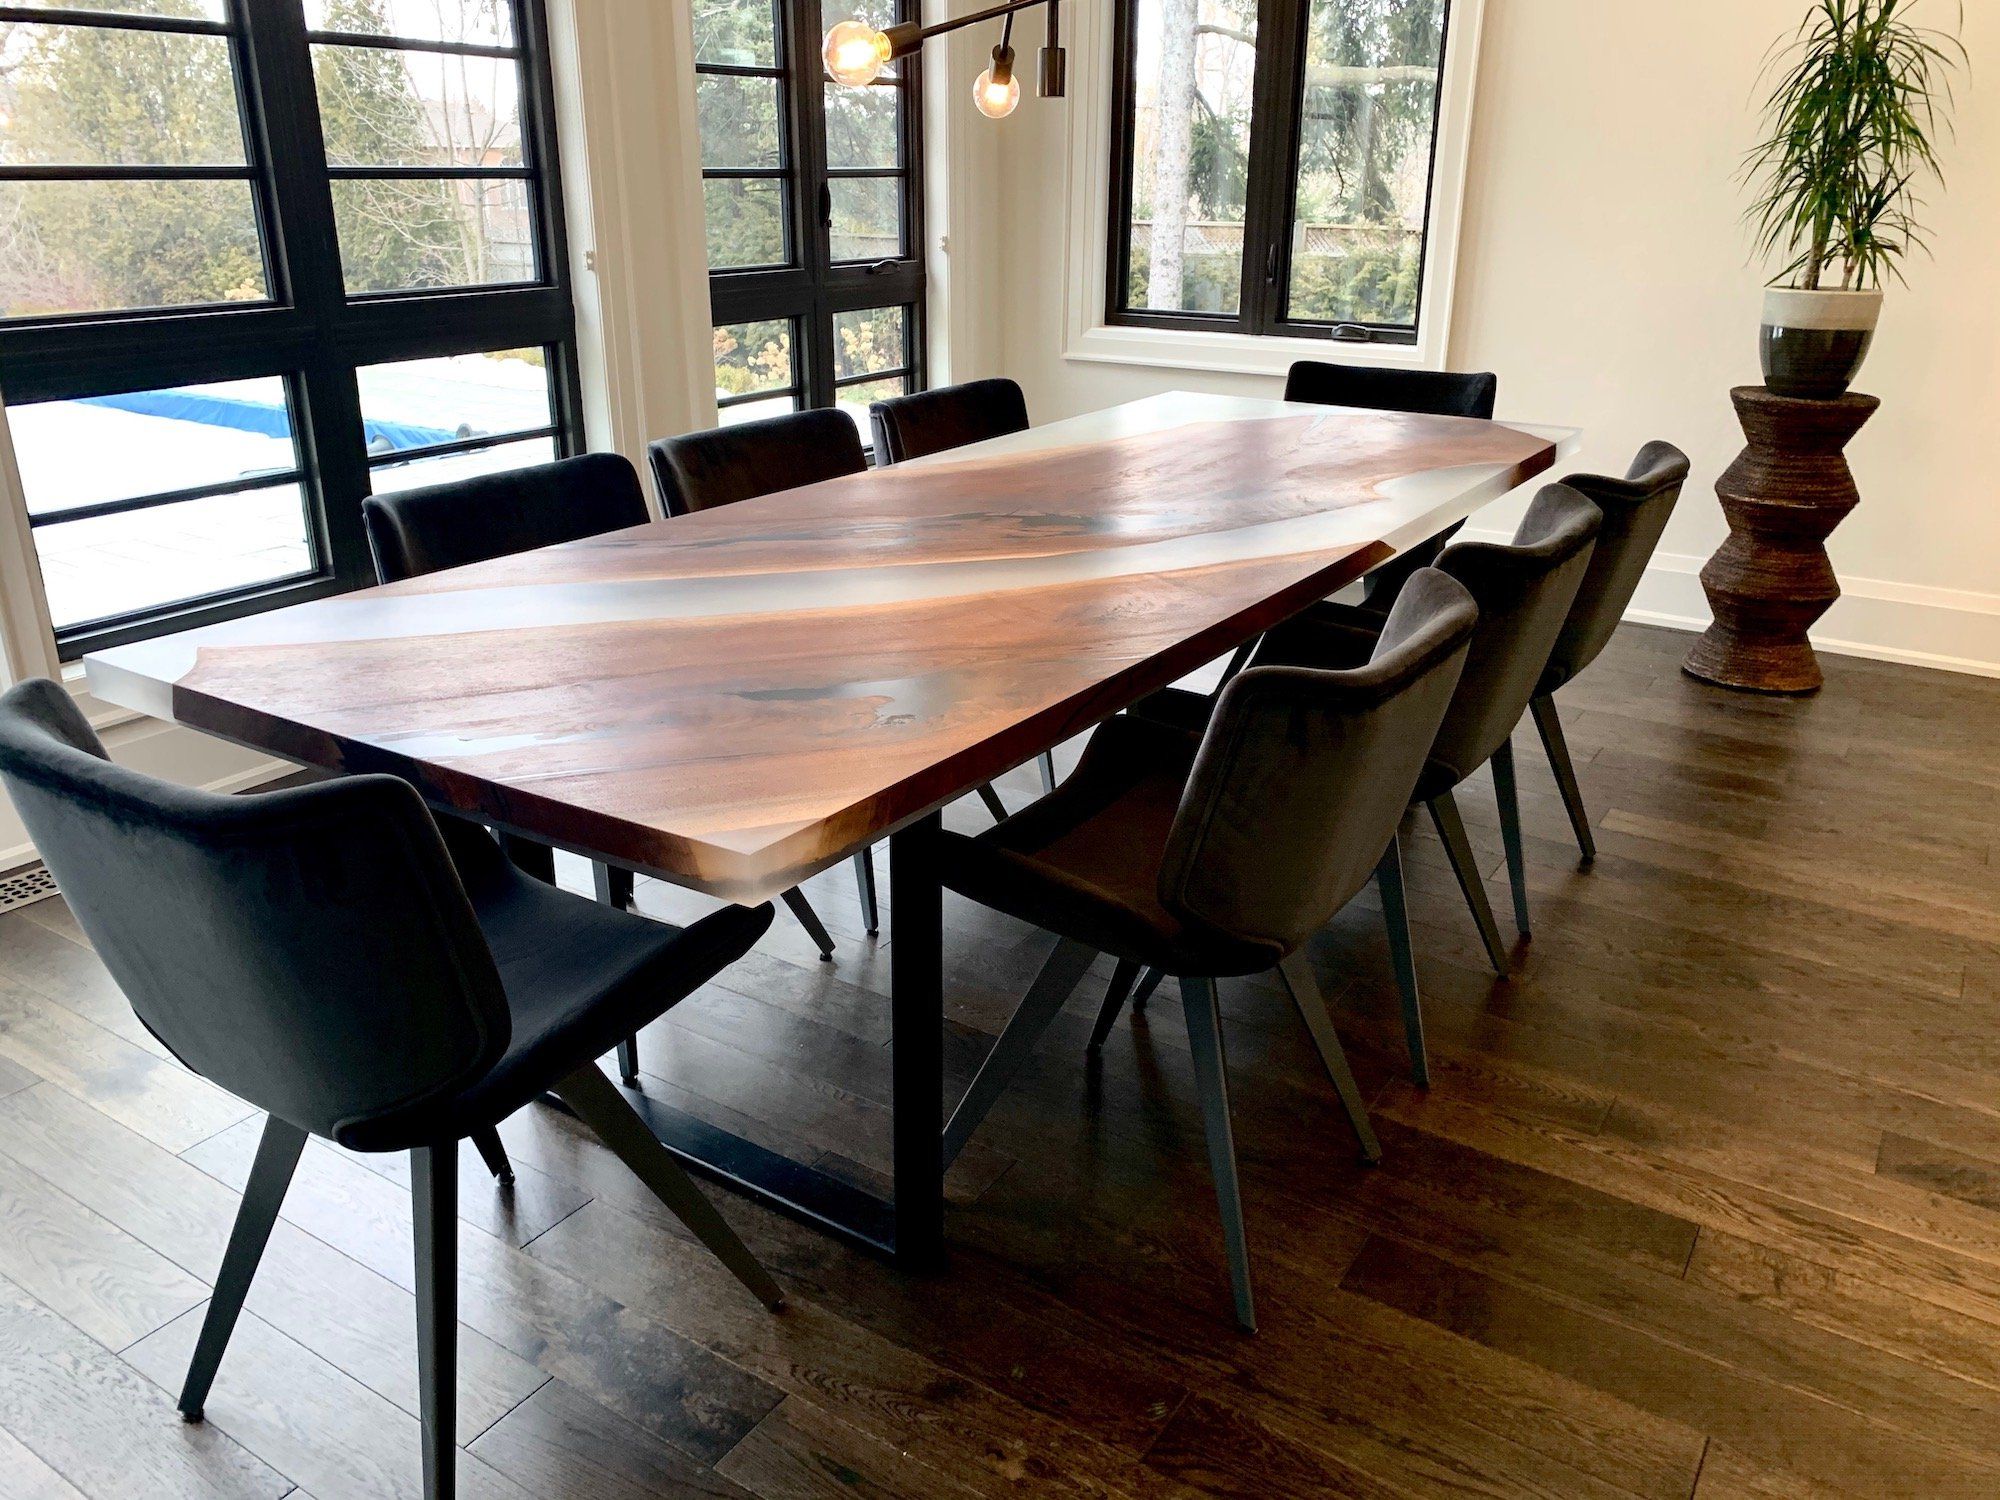 White And Black Dining Tables In Well Known Dining Table Black Walnut Wood With Black And White Epoxy (View 15 of 20)